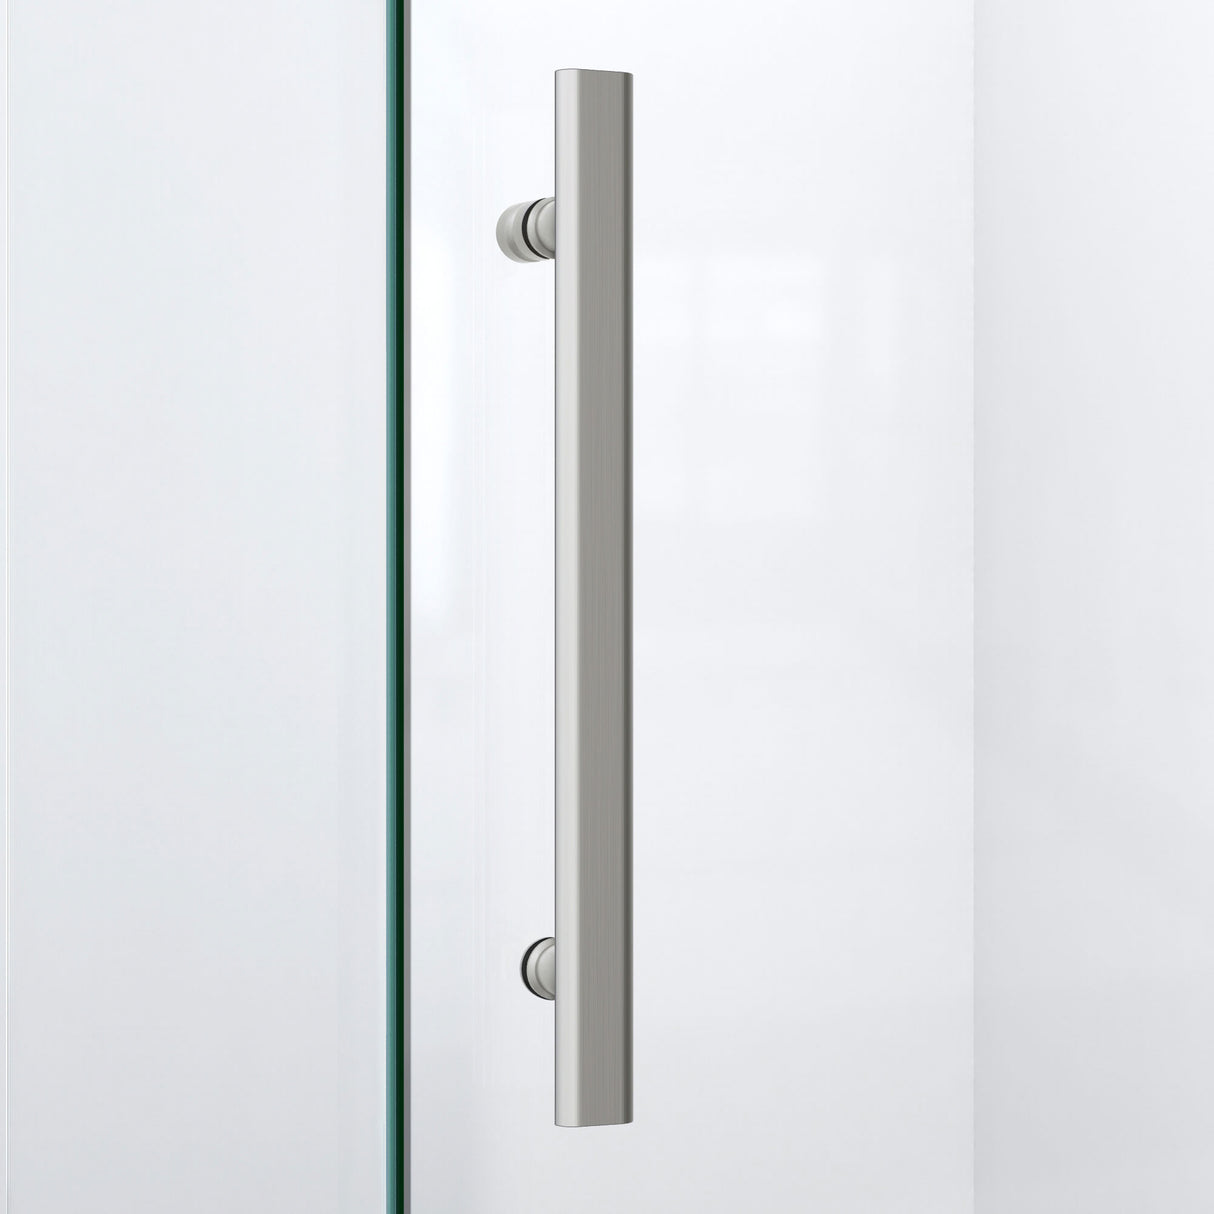 DreamLine Prism Lux 40 in. x 74 3/4 in. Fully Frameless Neo-Angle Shower Enclosure in Brushed Nickel with White Base